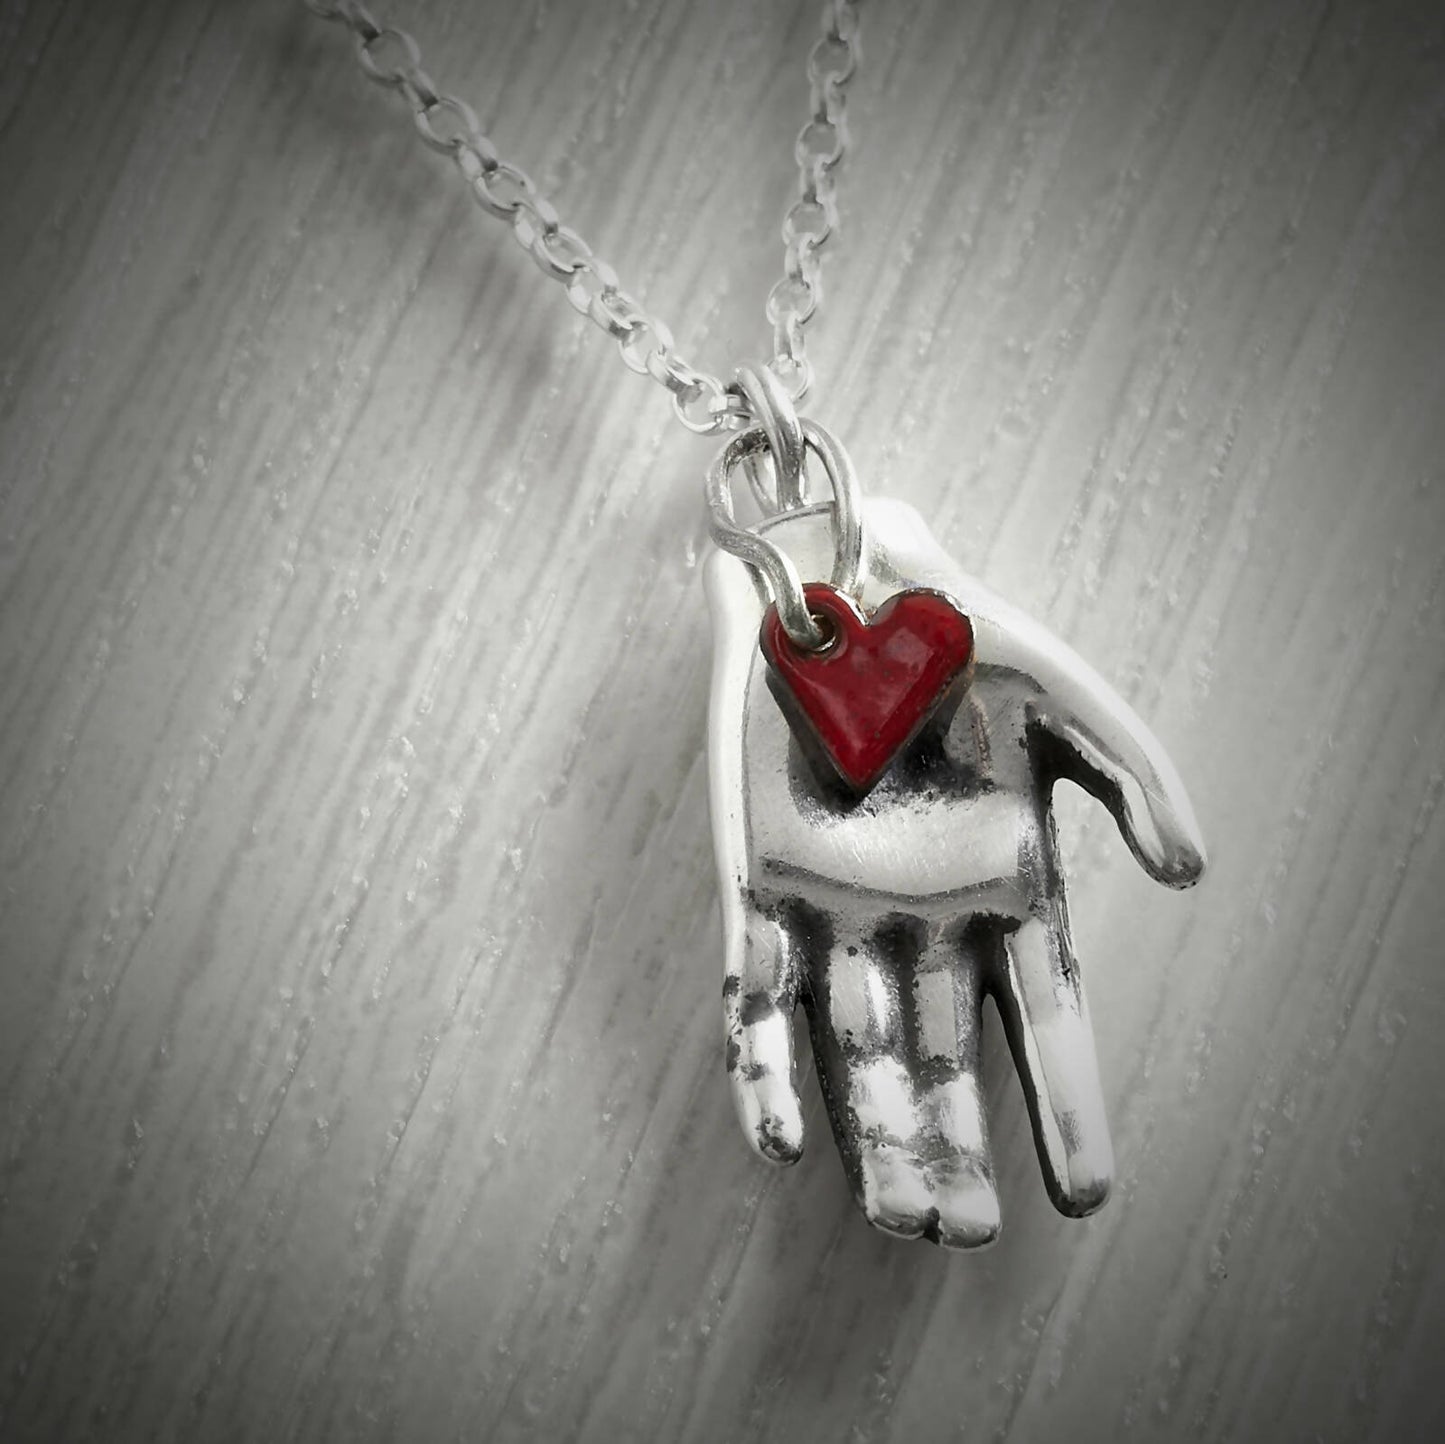 Red Heart in Hand Necklace by Emma White